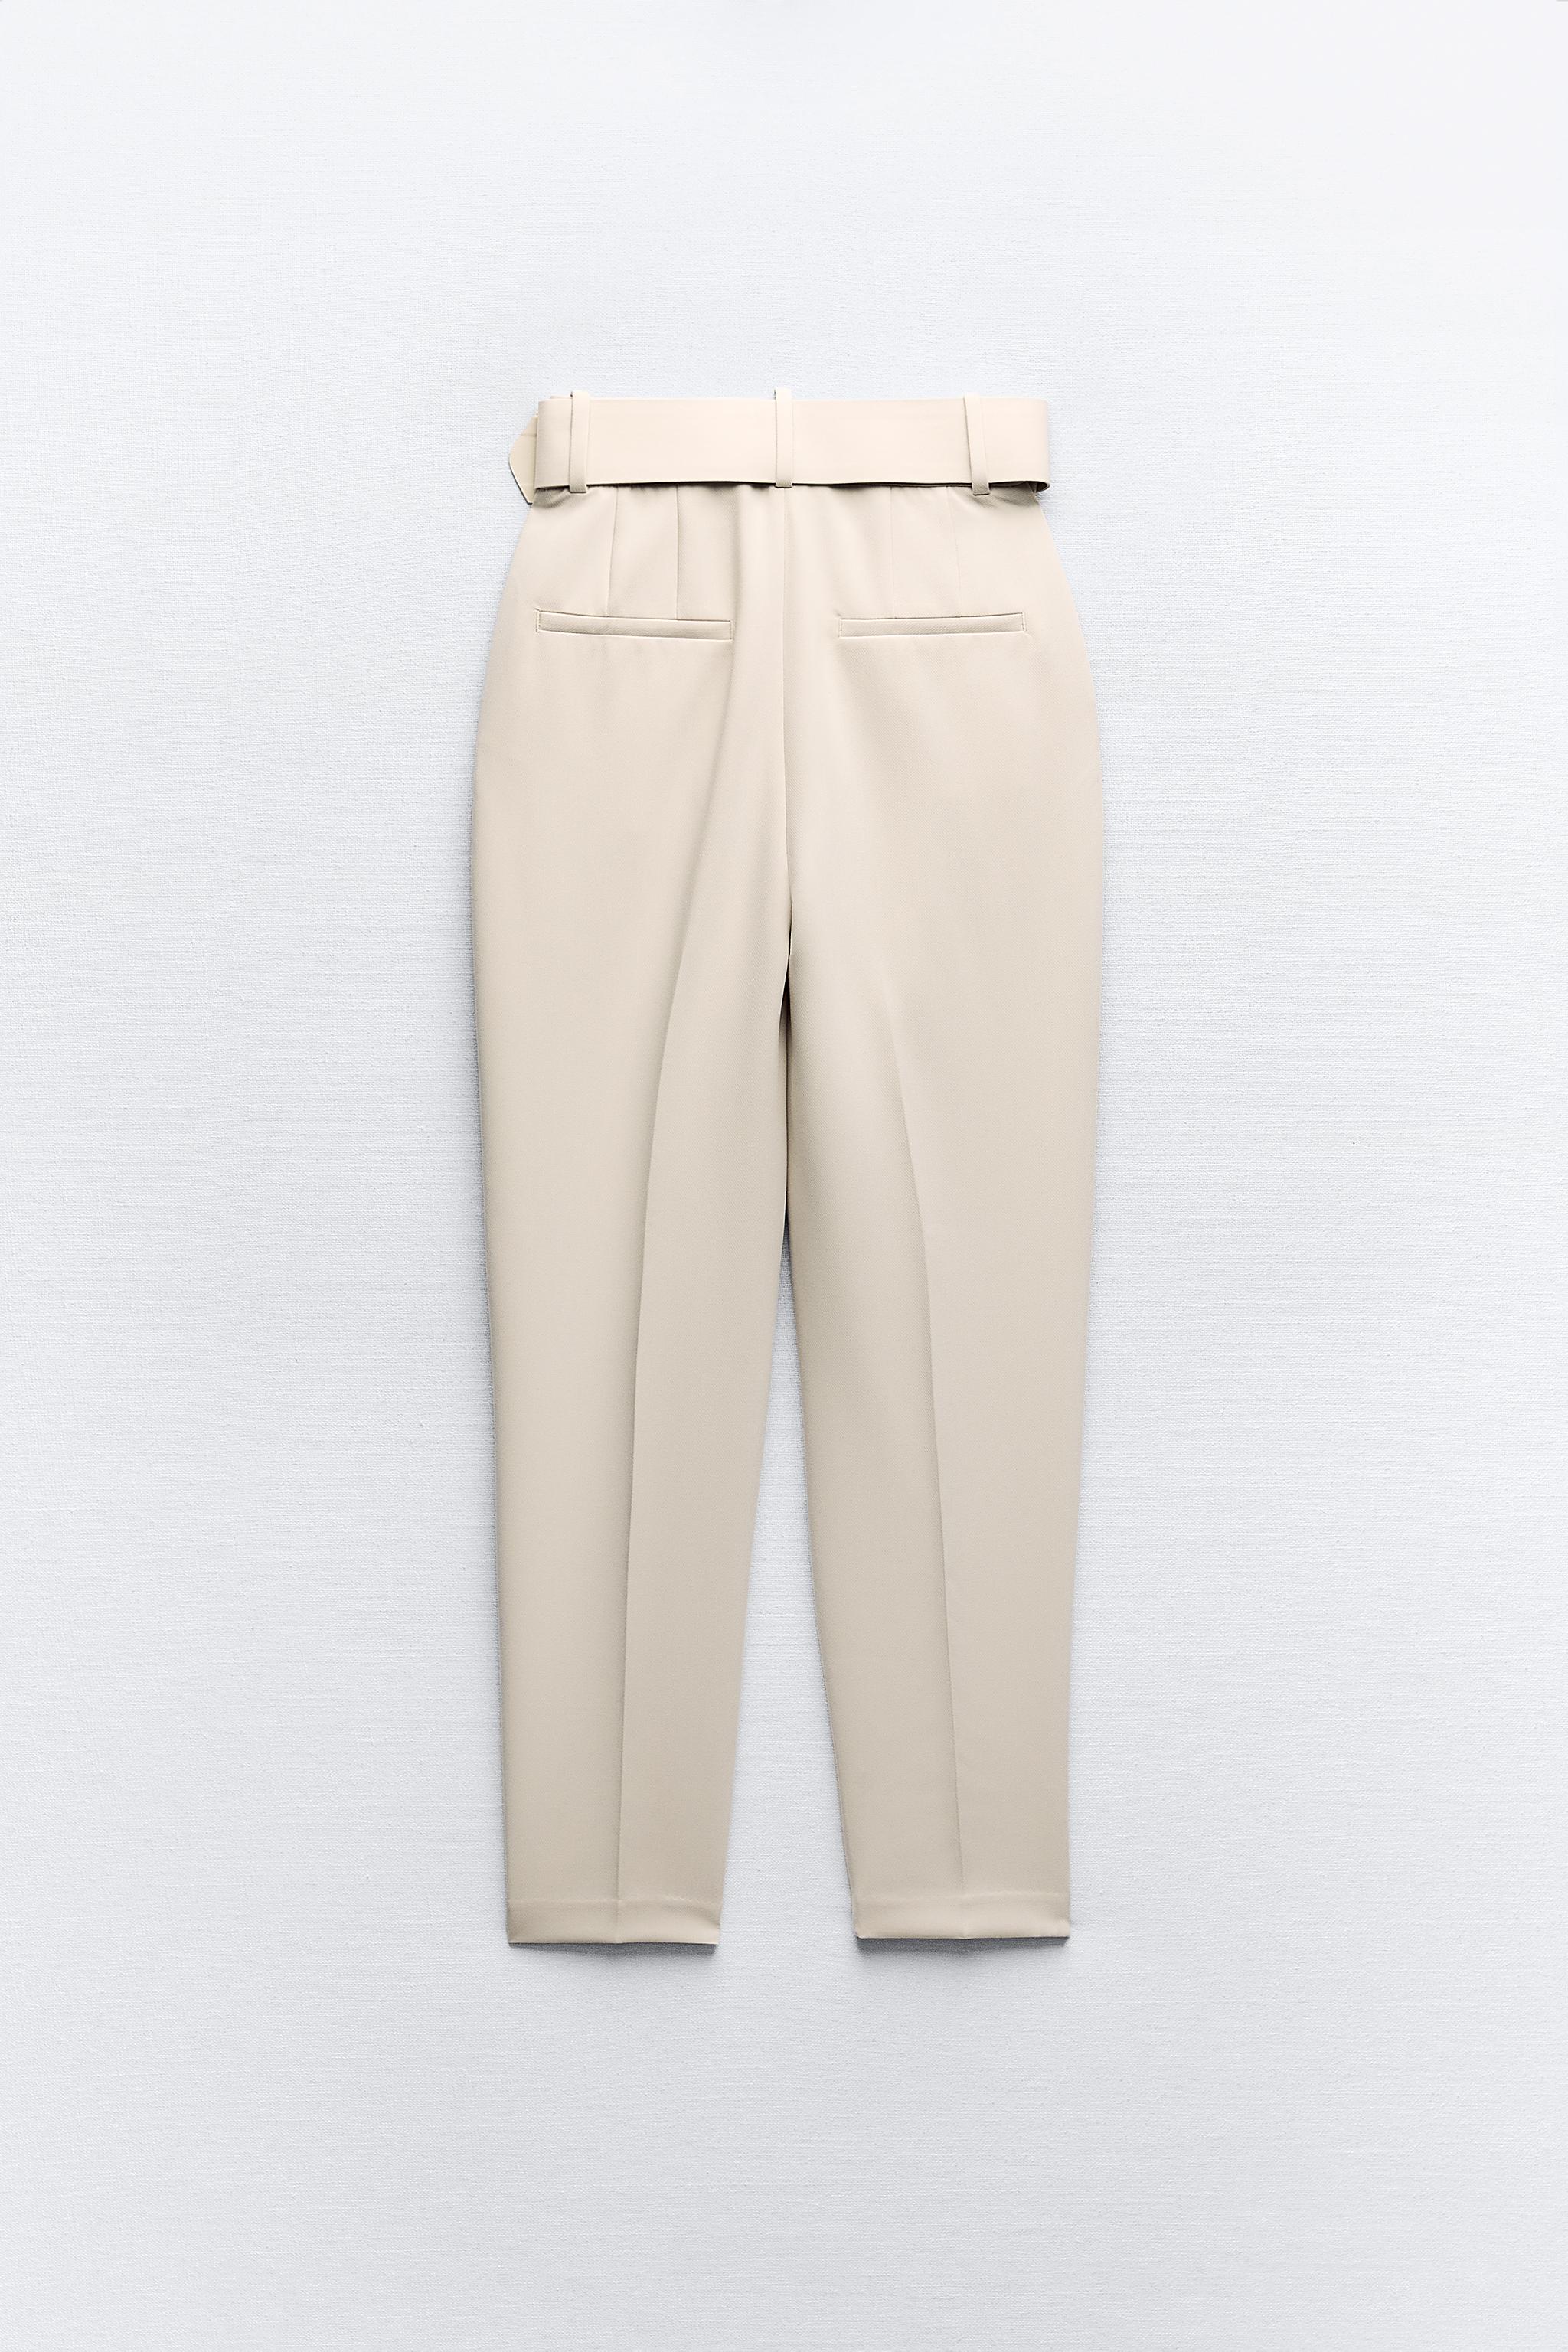 Zara Trousers with Lined Belt